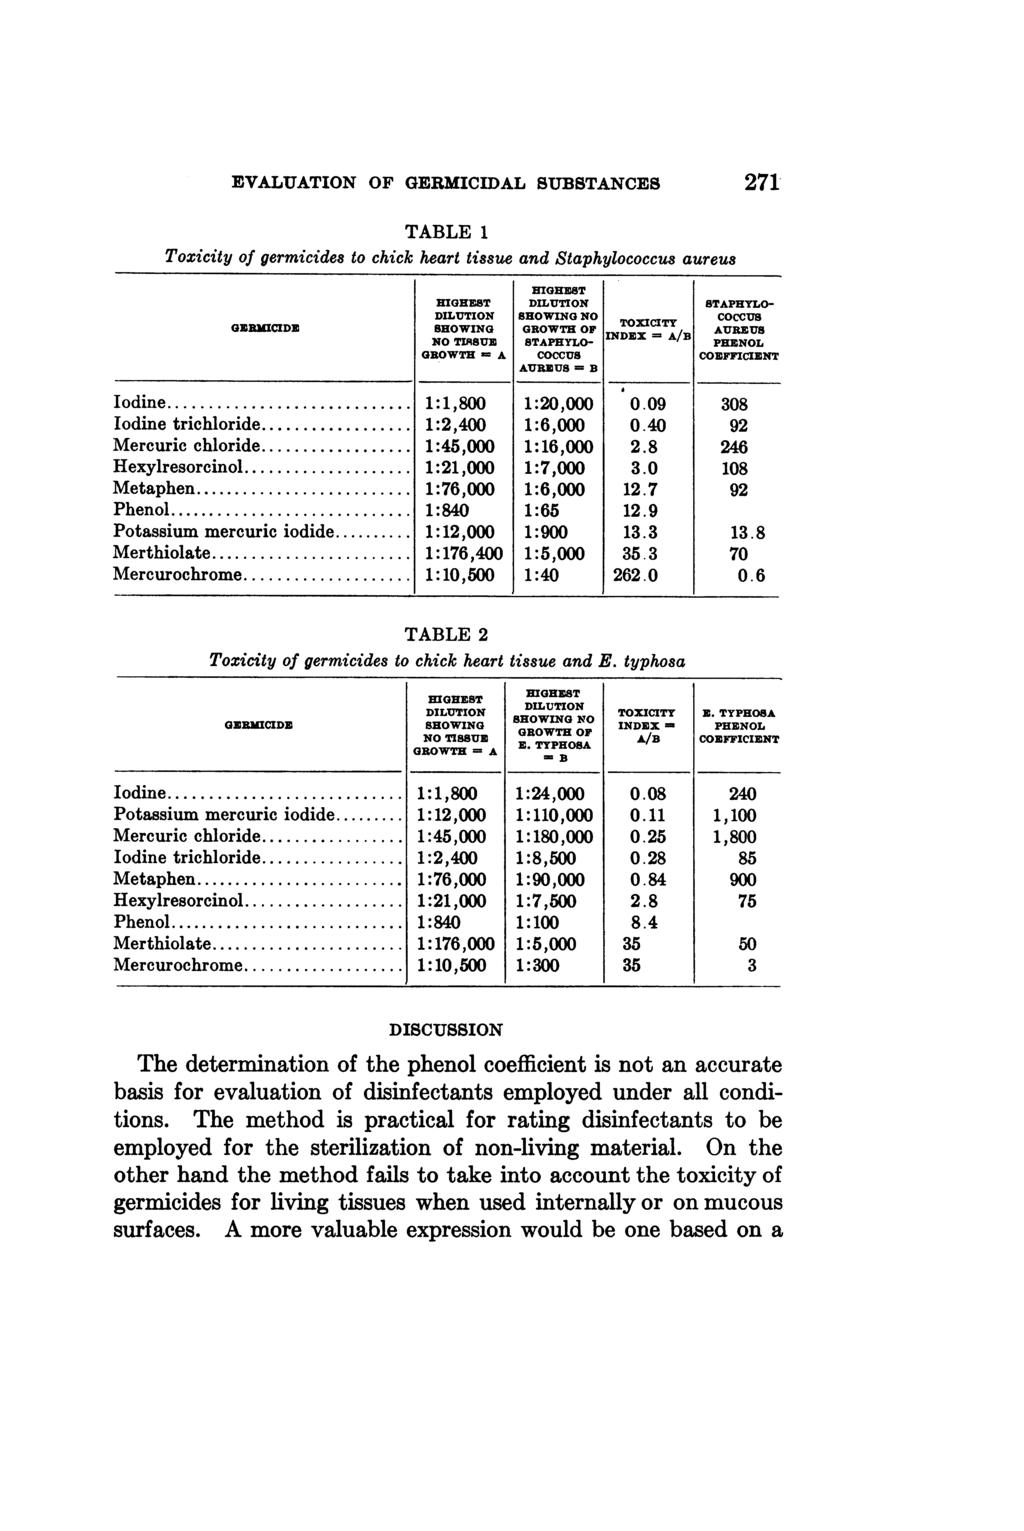 EVALUATION OF GERMICIDAL SUBSTANCES 271 TABLE 1 Toxicity of germicides to chick heart tissue and Staphylococcus aureus GERMICID DILUTION SHOWING NO TOXICITY COCCUS ESHOWING GROWTH OF INDEX =/ ARU NO